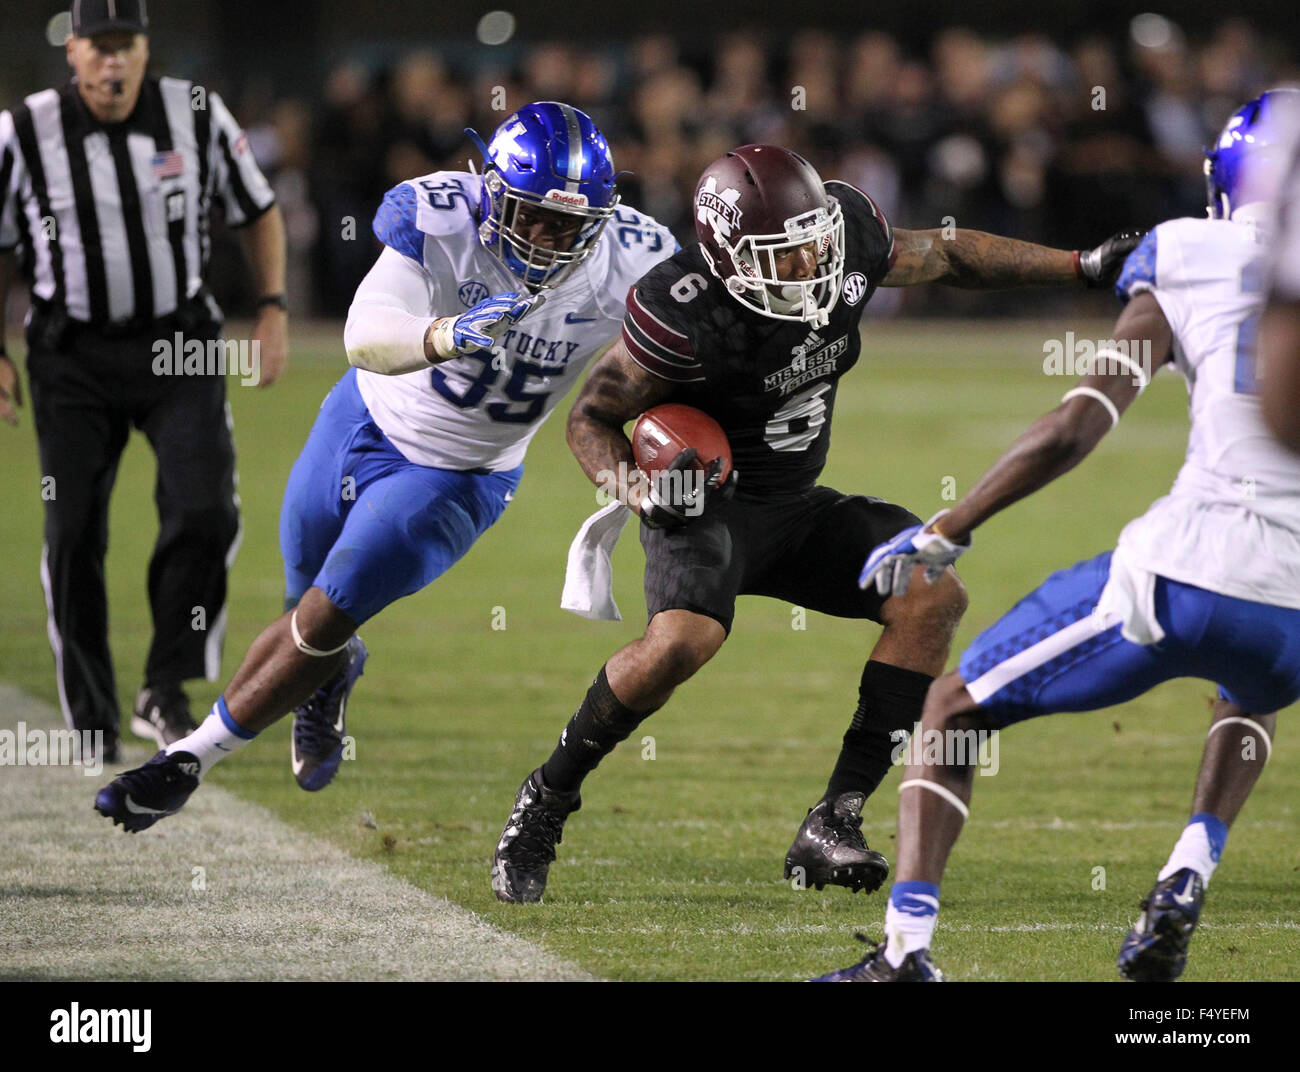 Starkville, MS, USA. 24th Oct, 2015. Mississippi State WR, Donald Gray (6) is pushed out of bounds by Kentucky LB, Denzil Ware (35) during the NCAA Football game between the Mississippi State Bulldogs and the Kentucky Wildcats at Davis Wade Stadium in Starkville, MS. Chuck Lick/CSM/Alamy Live News Stock Photo